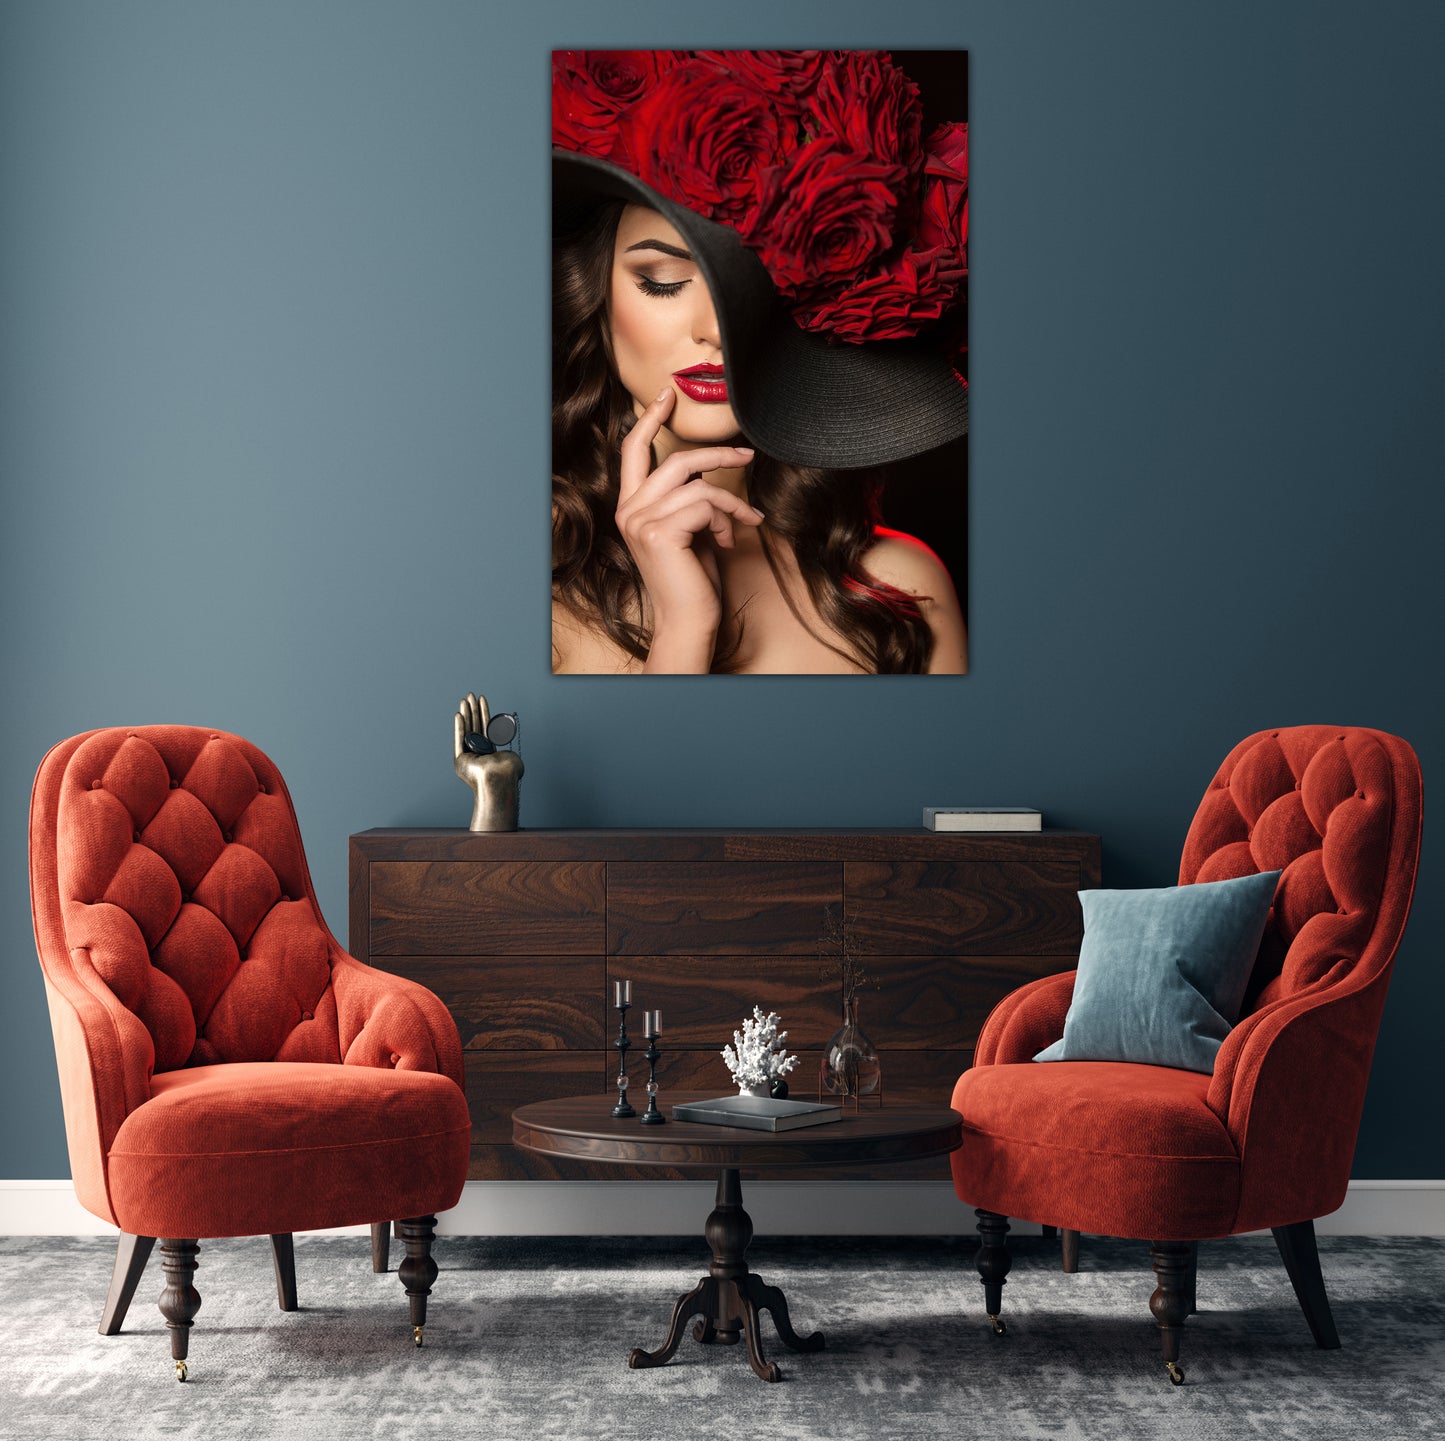 Red Rose Hat Glass Wall Art 48"x32" - Expo Home Decor